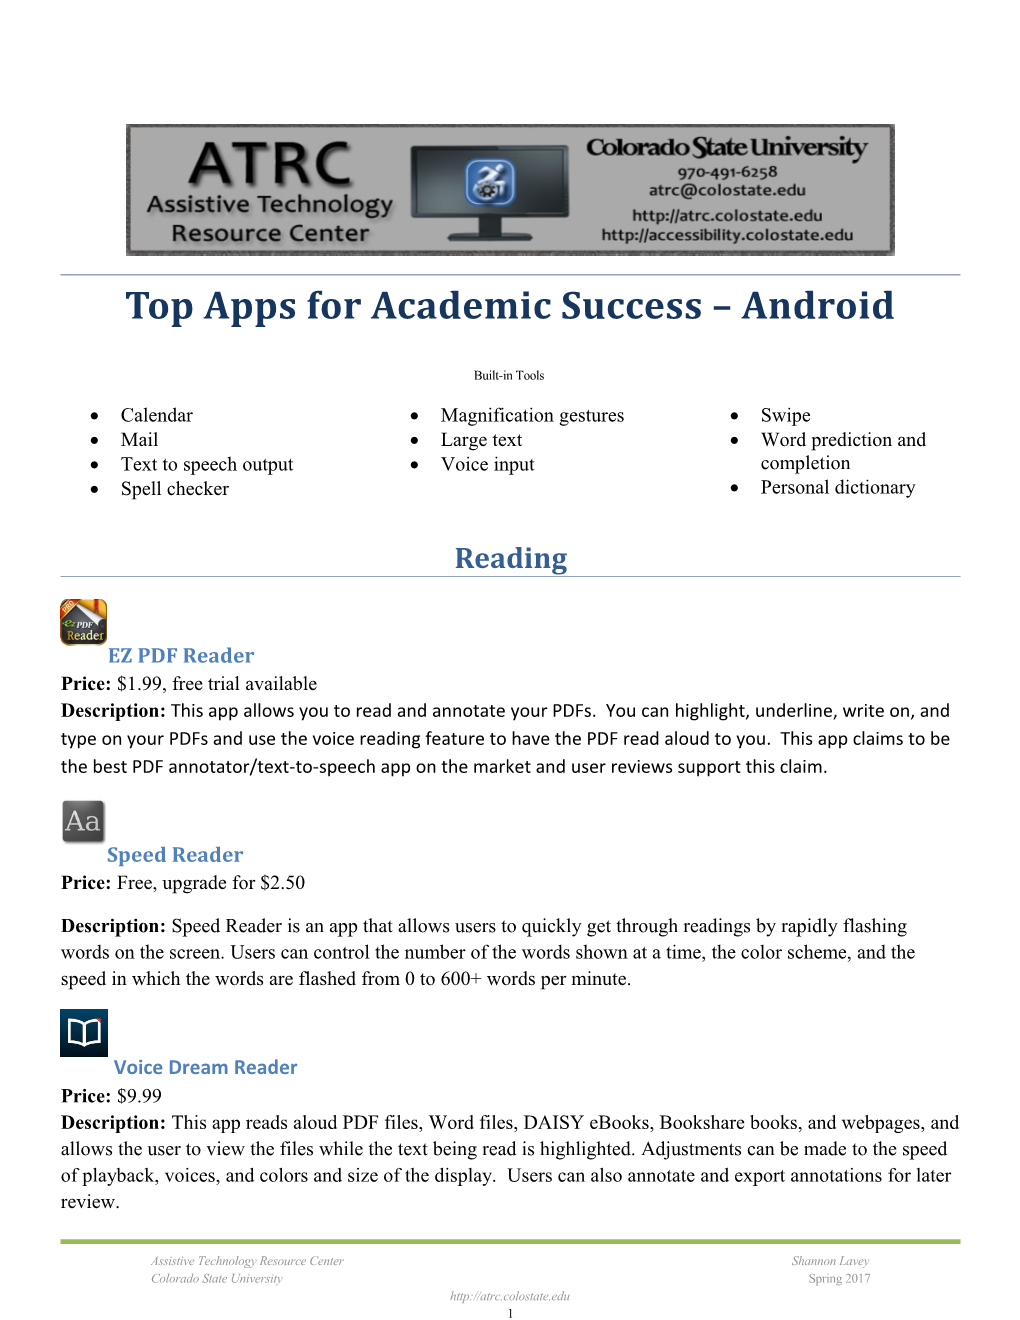 Top Apps for Academic Success Android